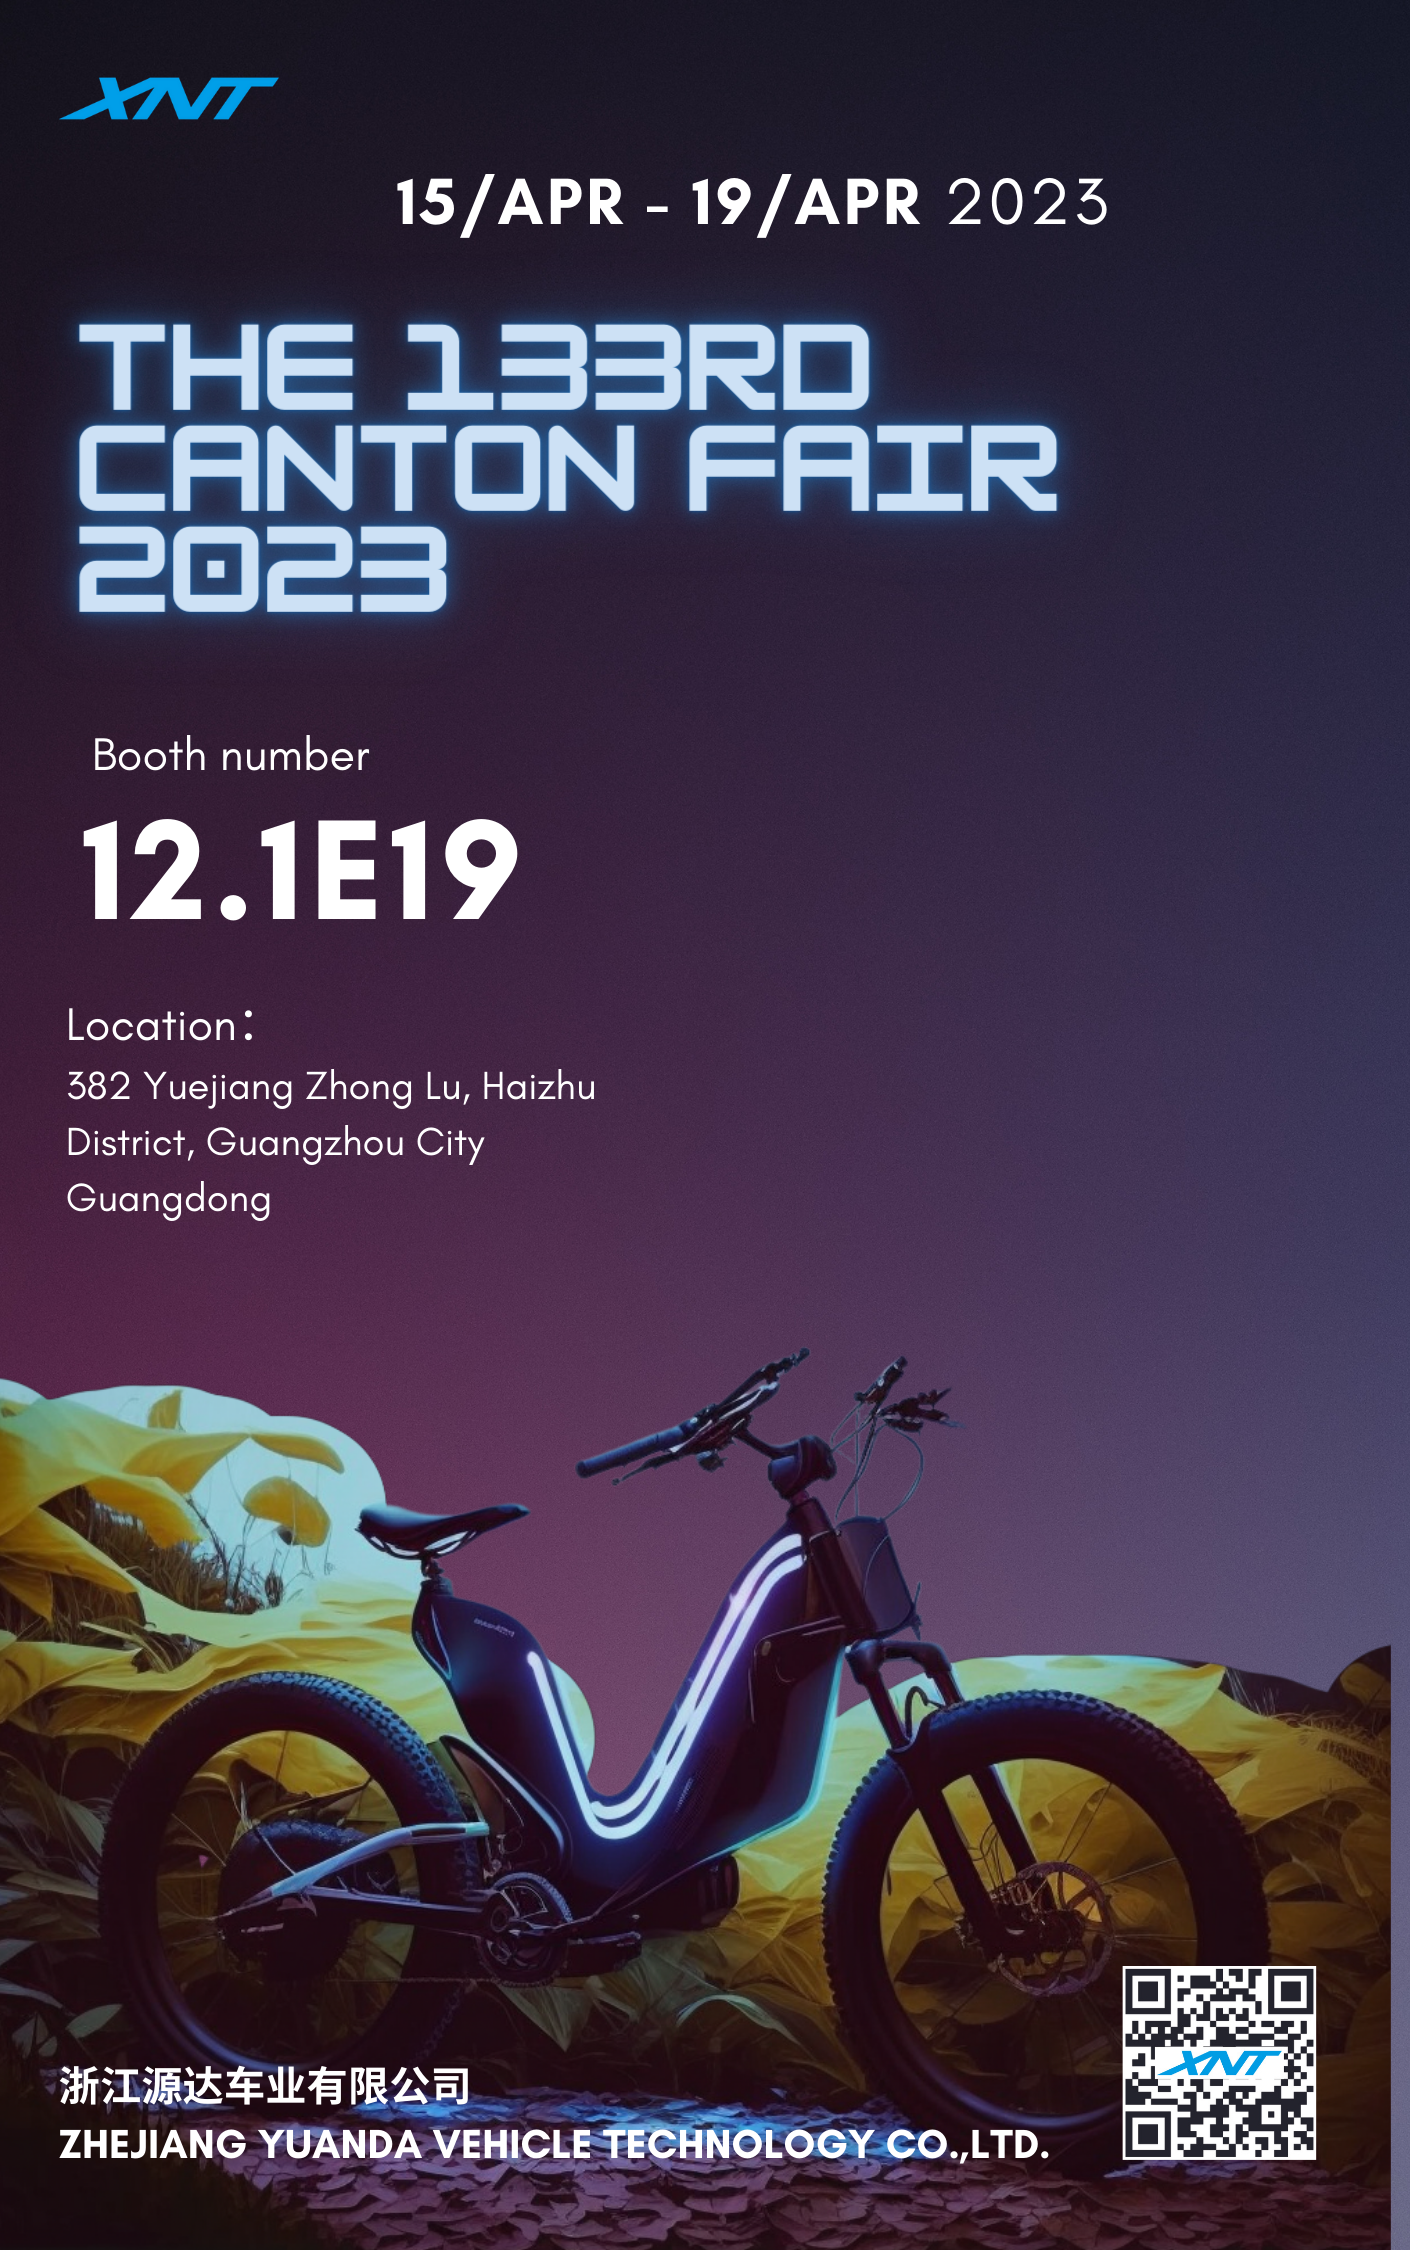 XNT will attend Canton Fair from April 15th to 19th, 2023